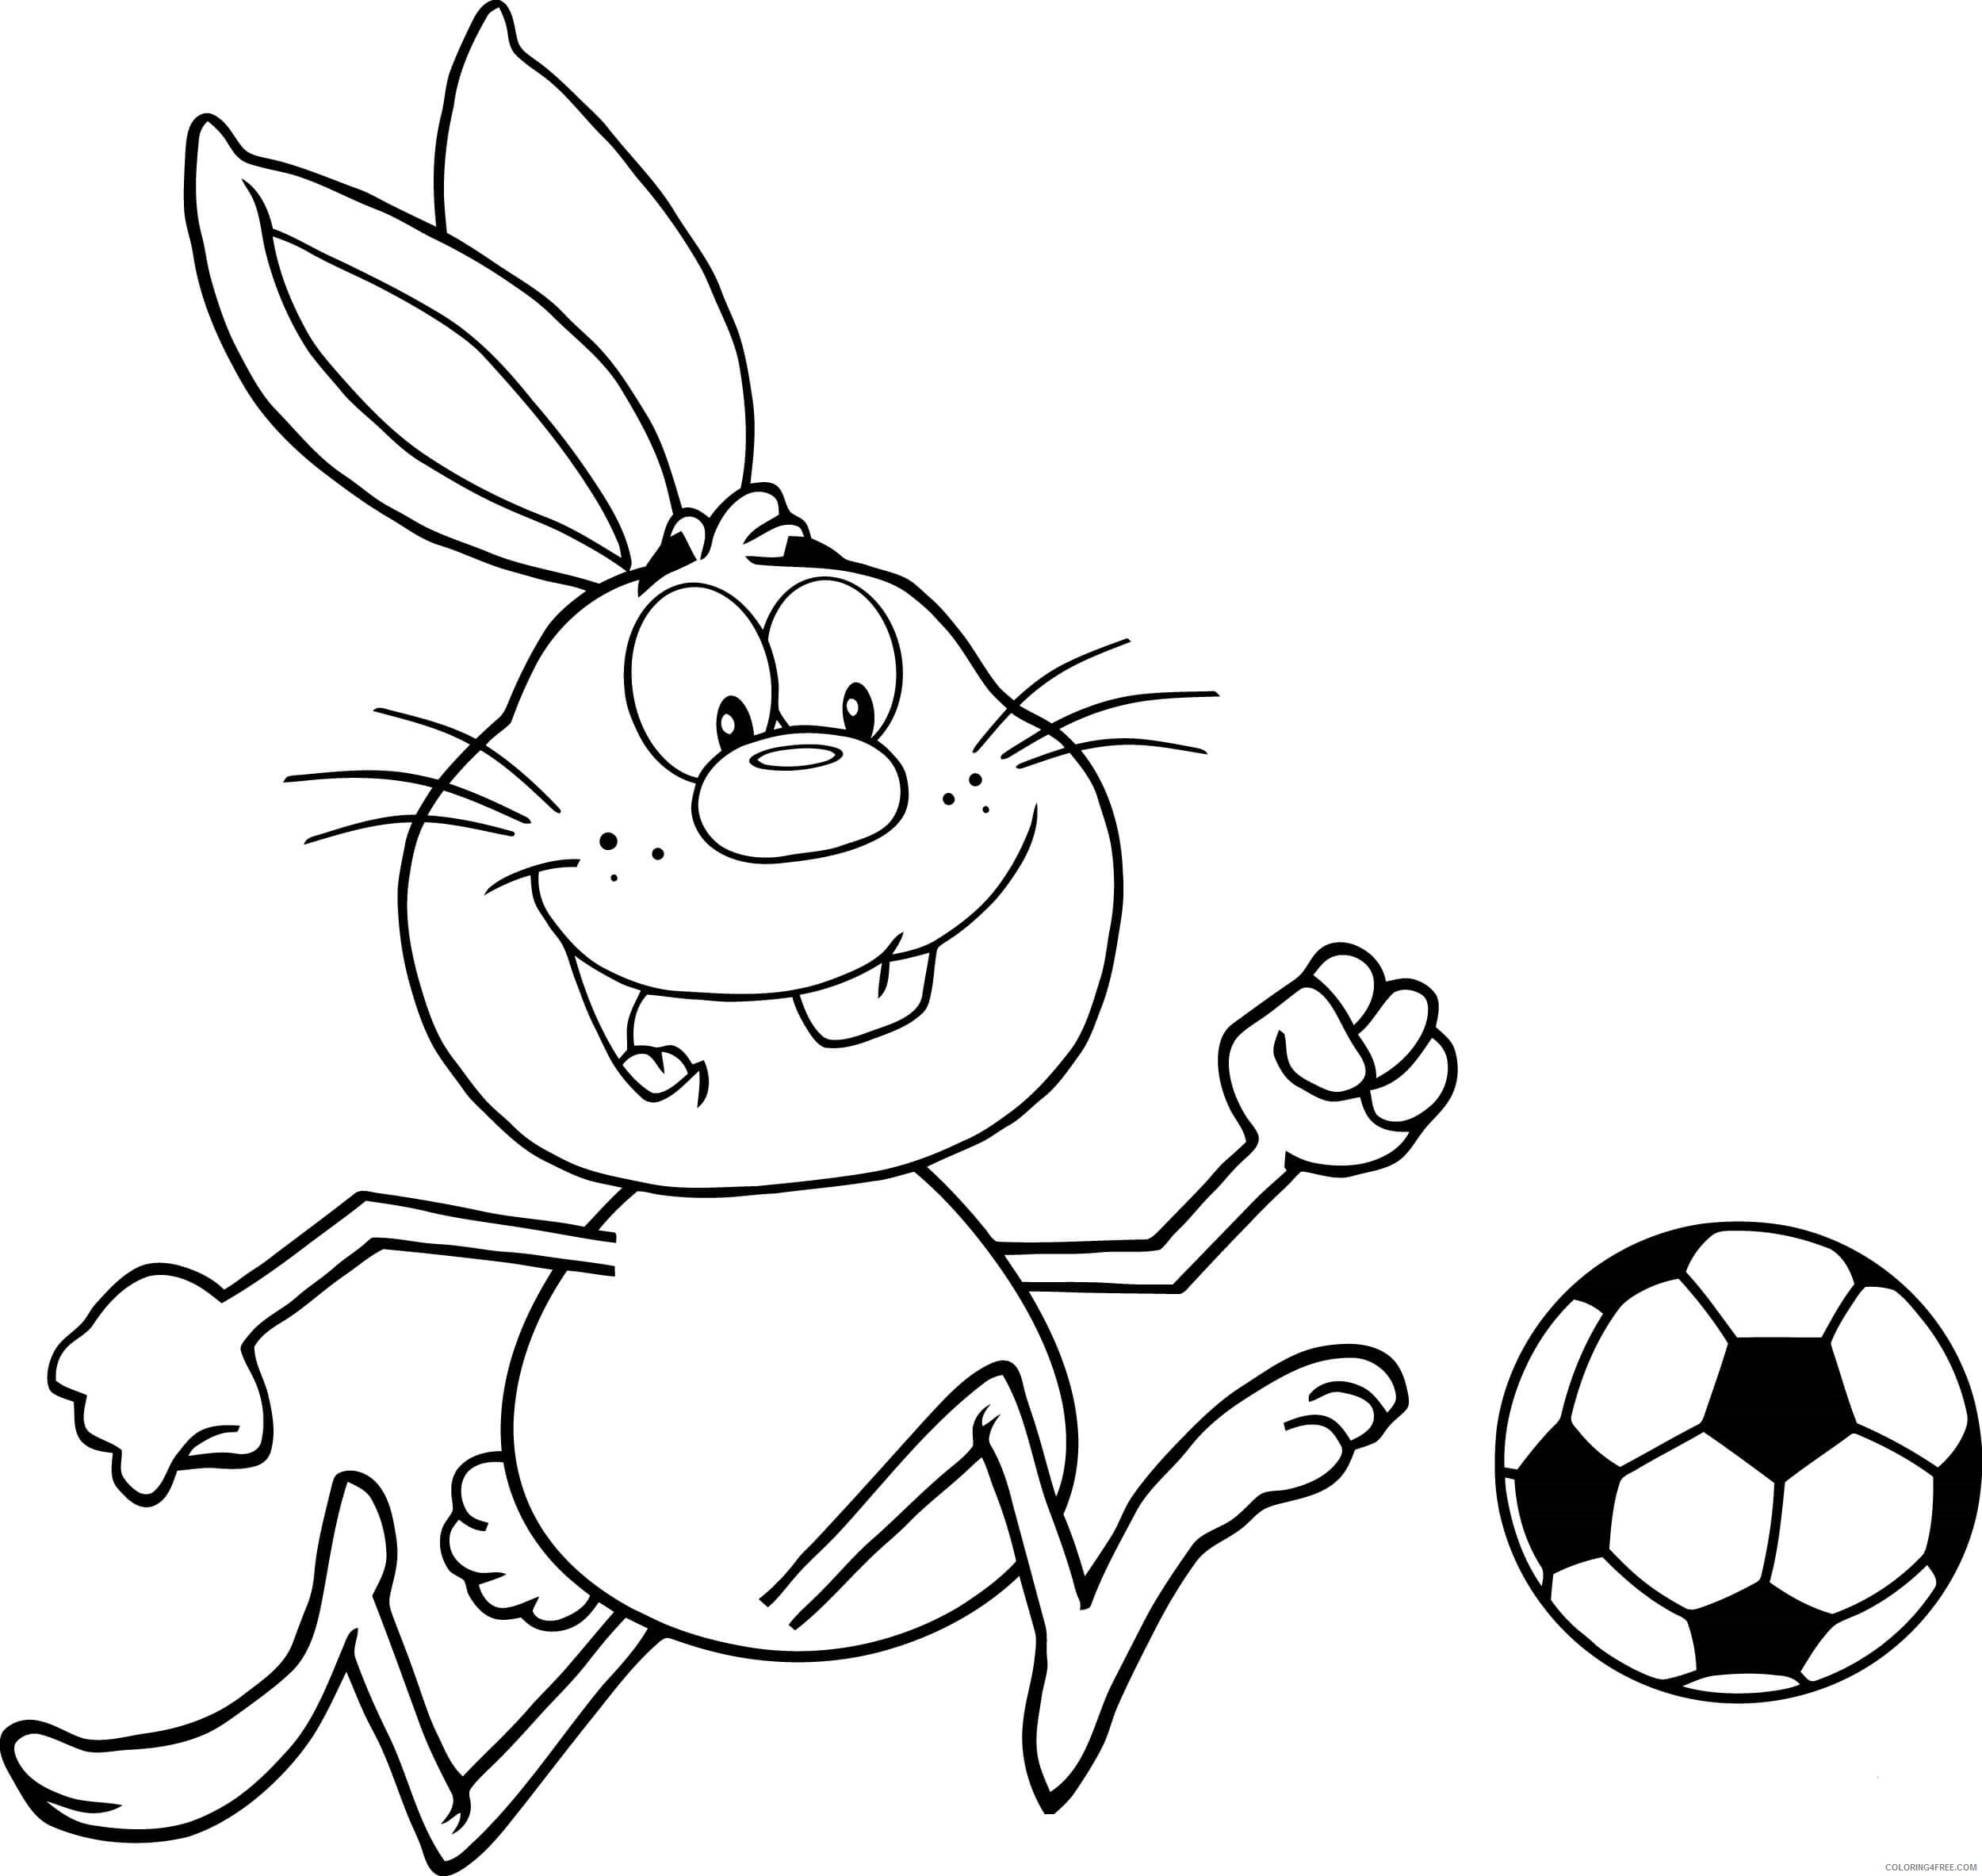 Soccer Coloring Pages for boys cute rabbit playing soccer Printable 2020 0898 Coloring4free